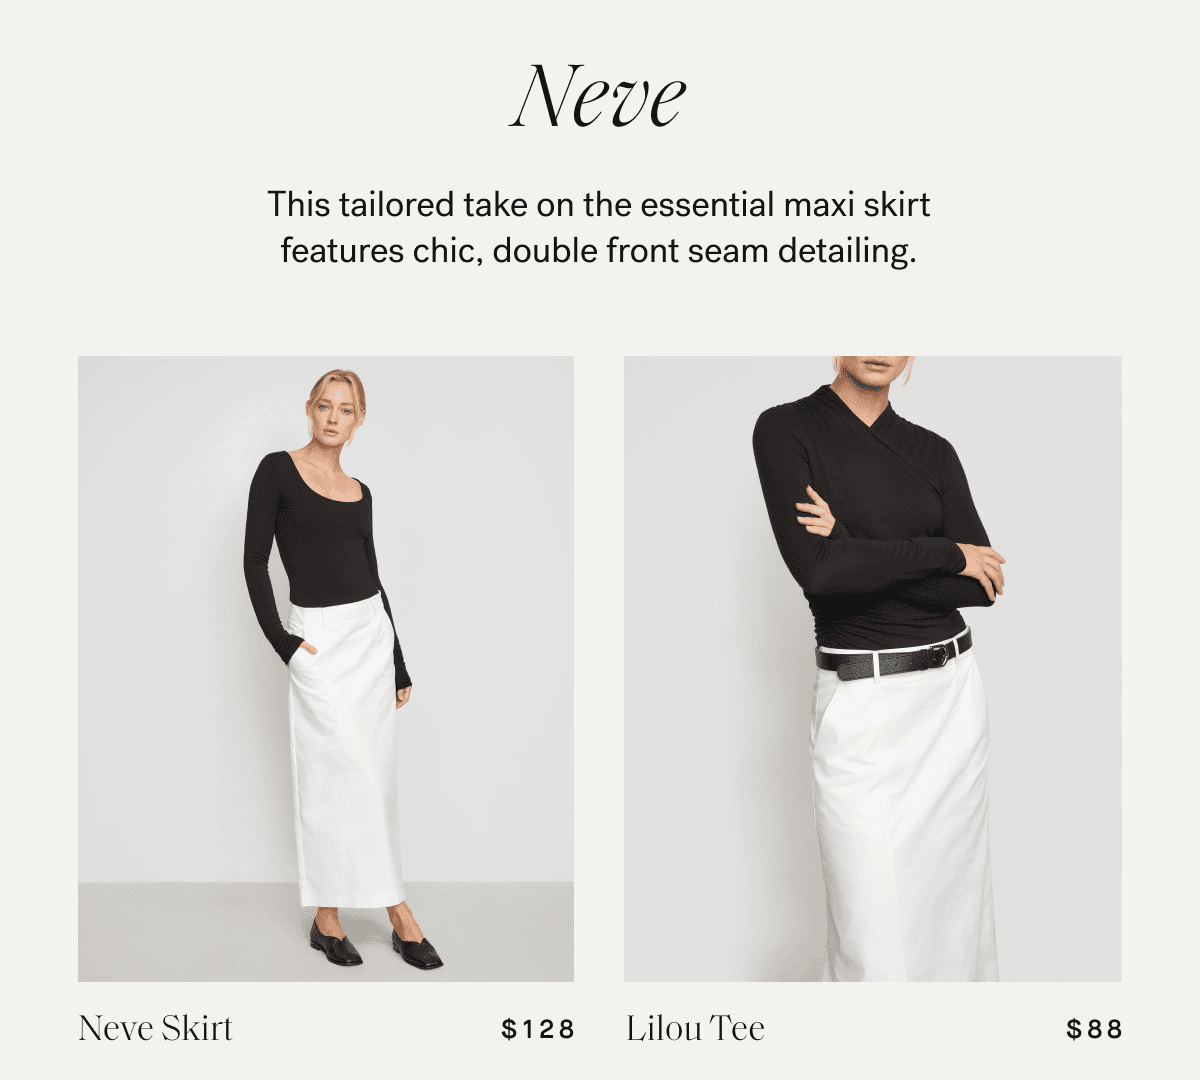 Neve — This tailored take on the essential maxi skirt features chic, double front seam detailing.